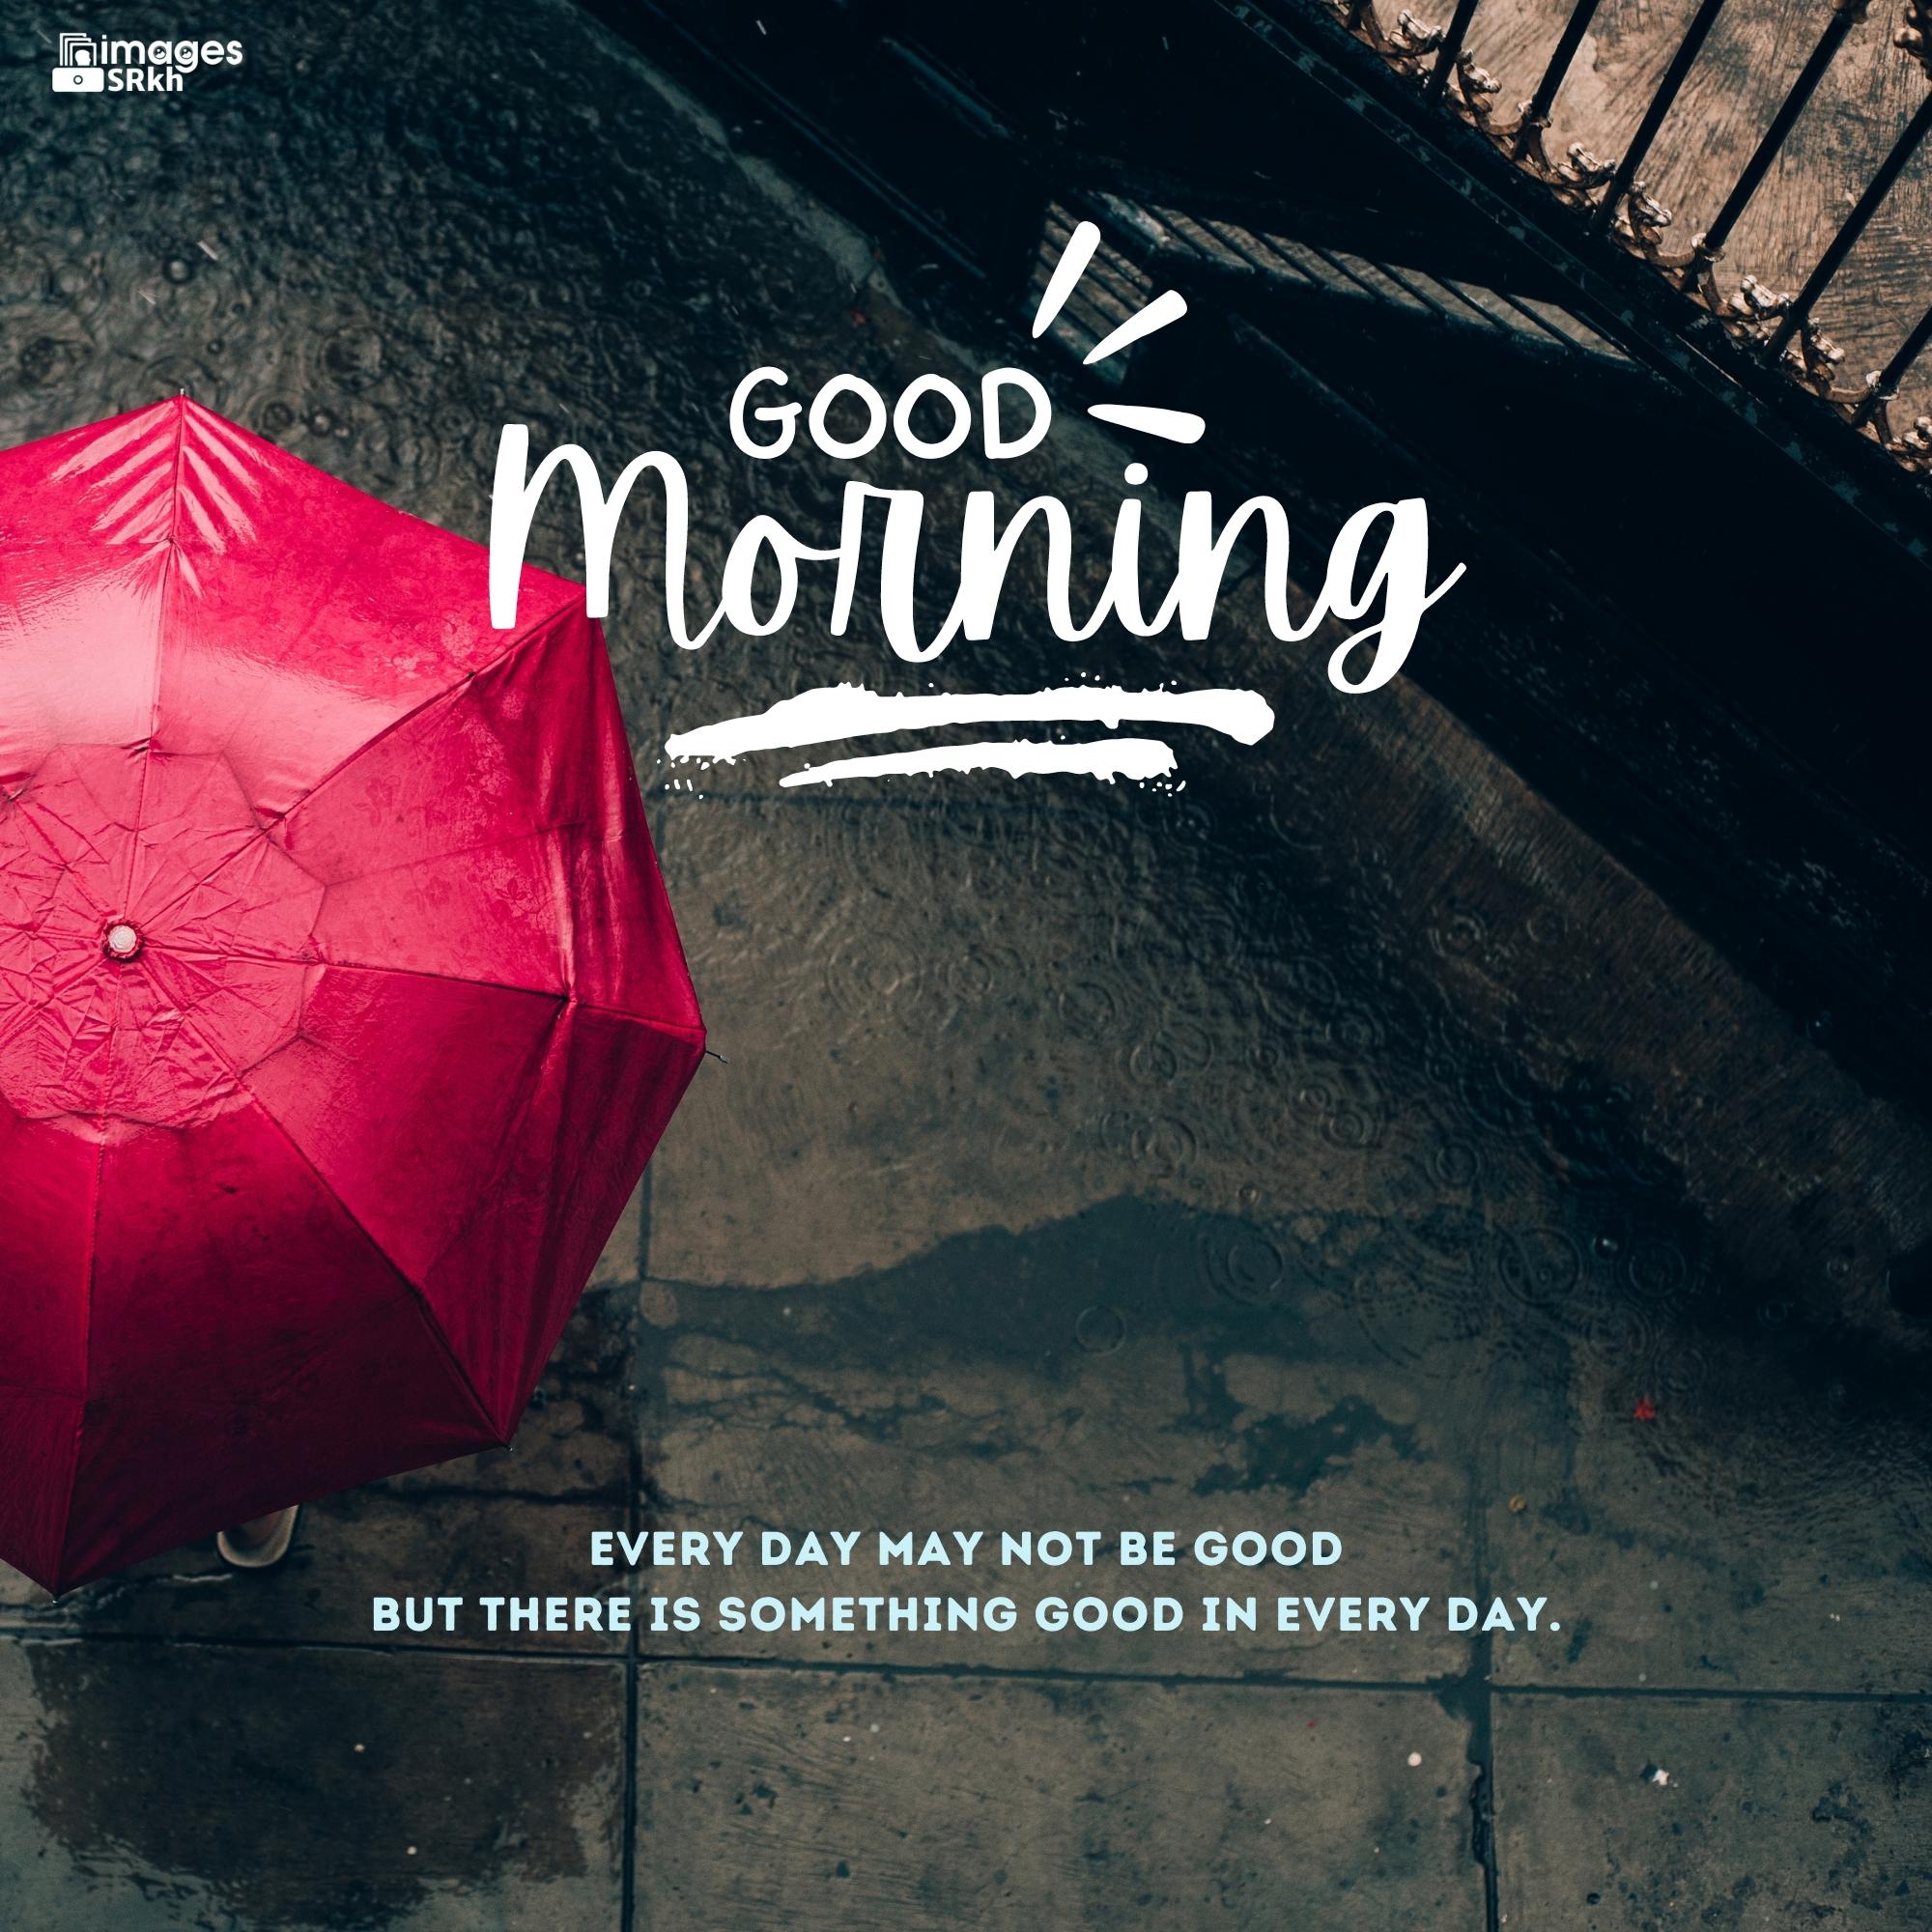 Good Morning Images With Rainy Day Full Hd